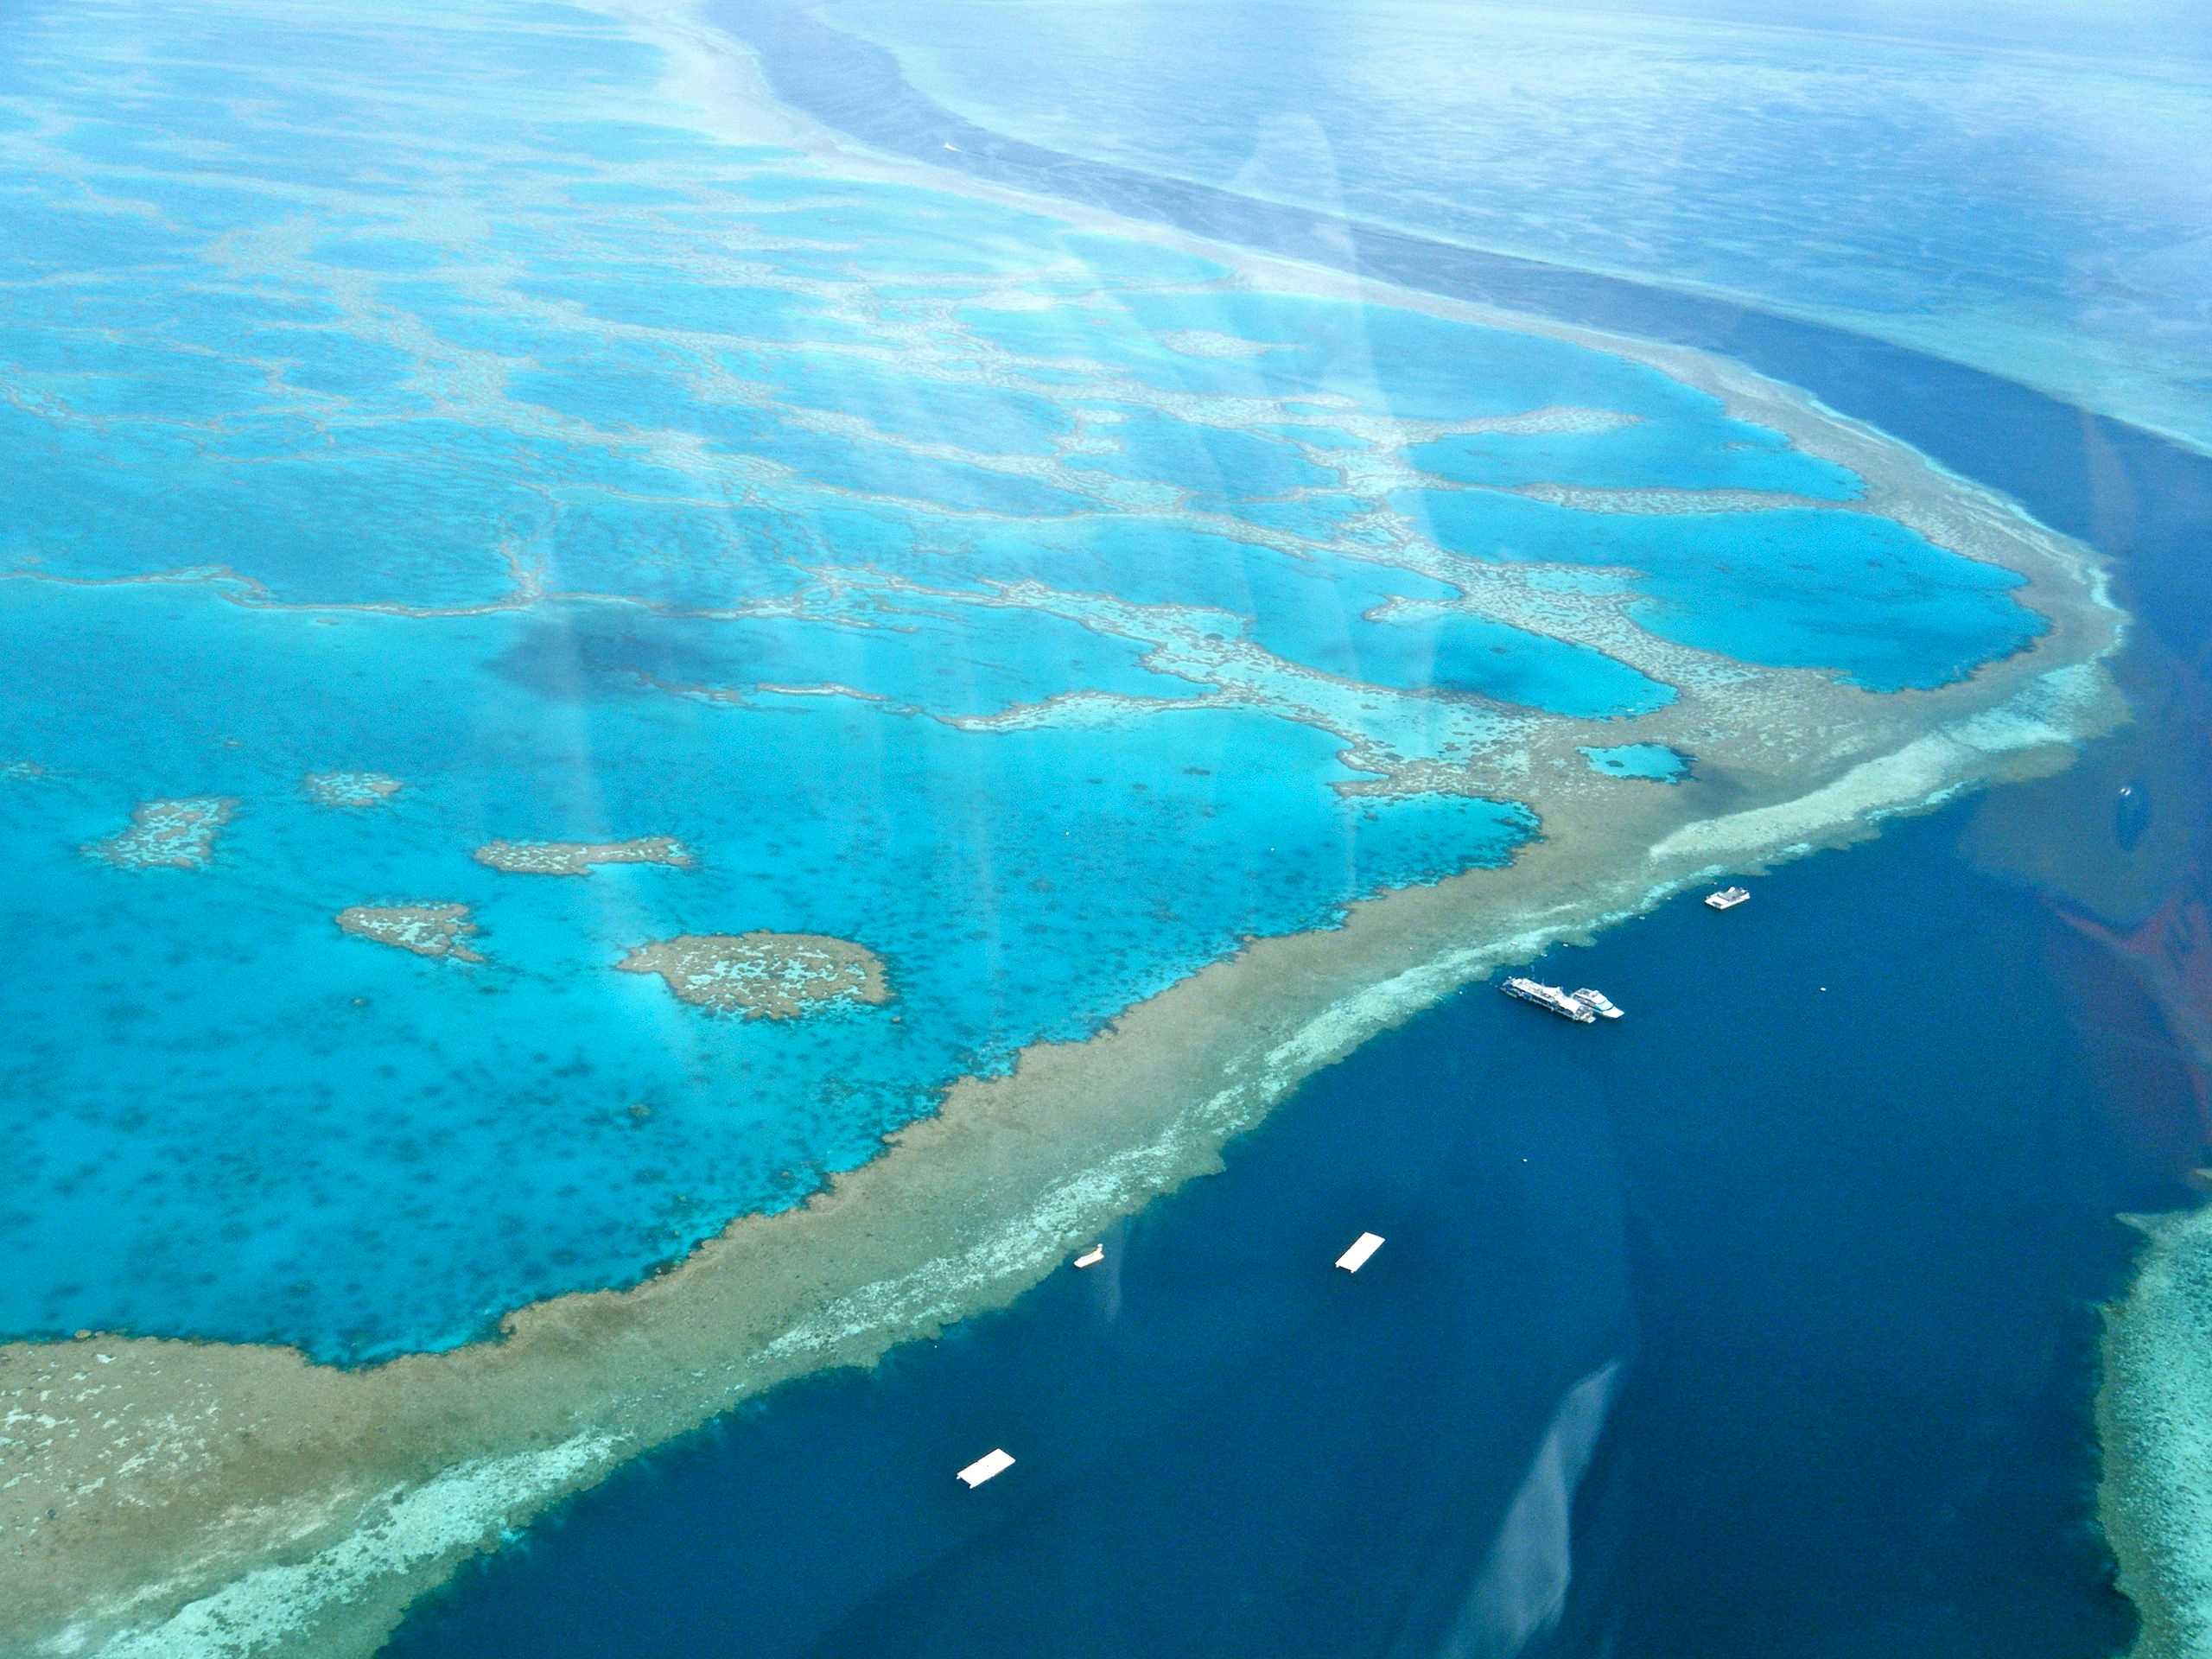 Helicopter ride over the Great Barrier Reef at the Whitsunday Islands, Australia.